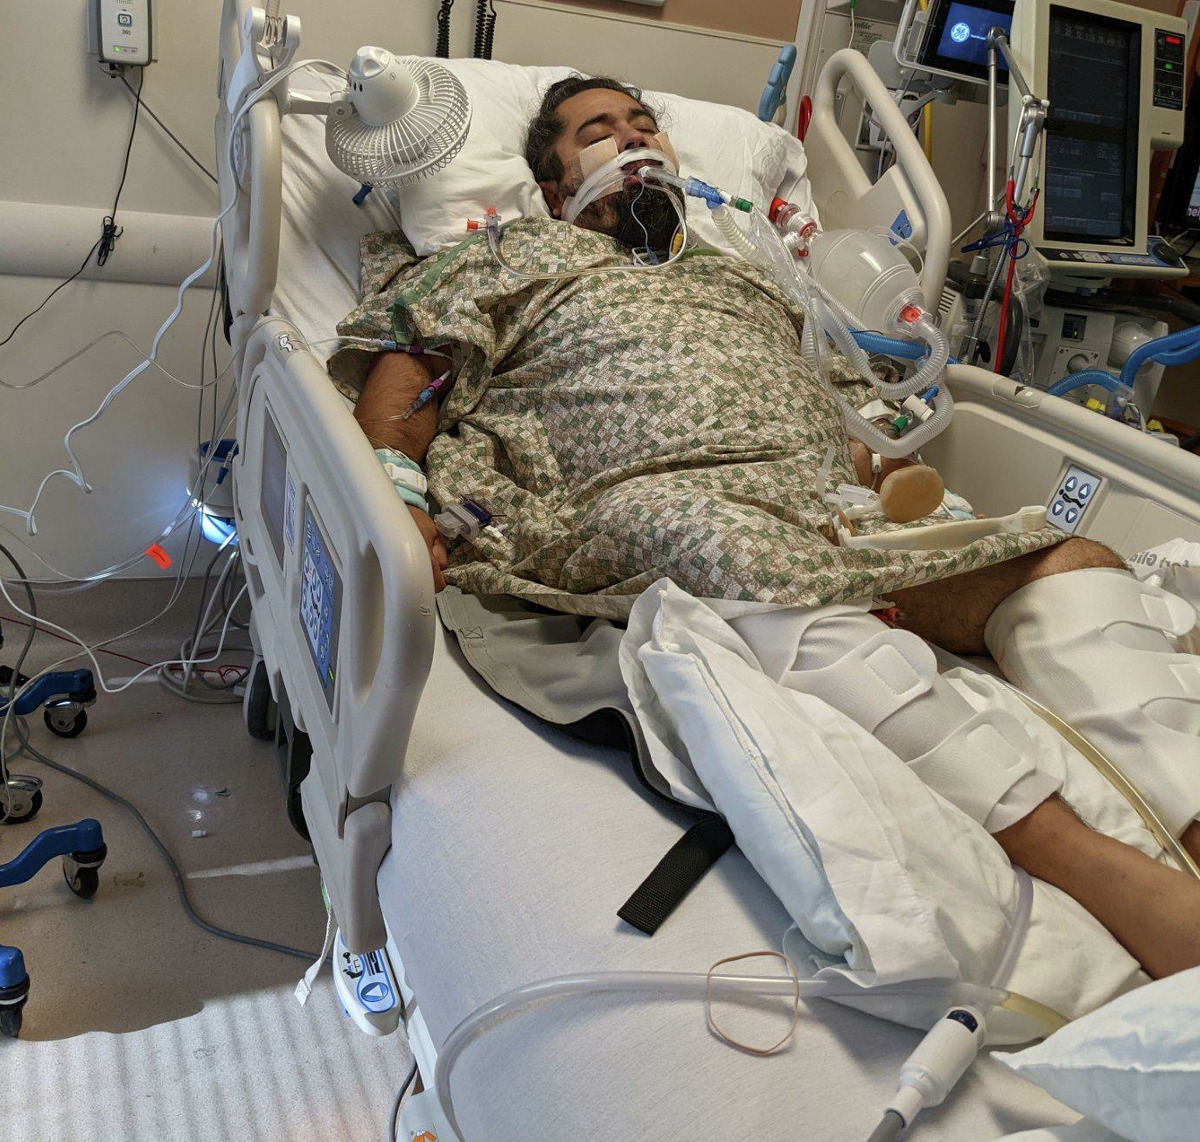 In September, Albert Bañuelos, diagnosed with the COVID-19 Delta variant, lies in a medically-induced coma, intubated and attached to a mechanical ventilator to help him breathe, as doctors and nurses cared for him at Methodist Hospital Northeast.